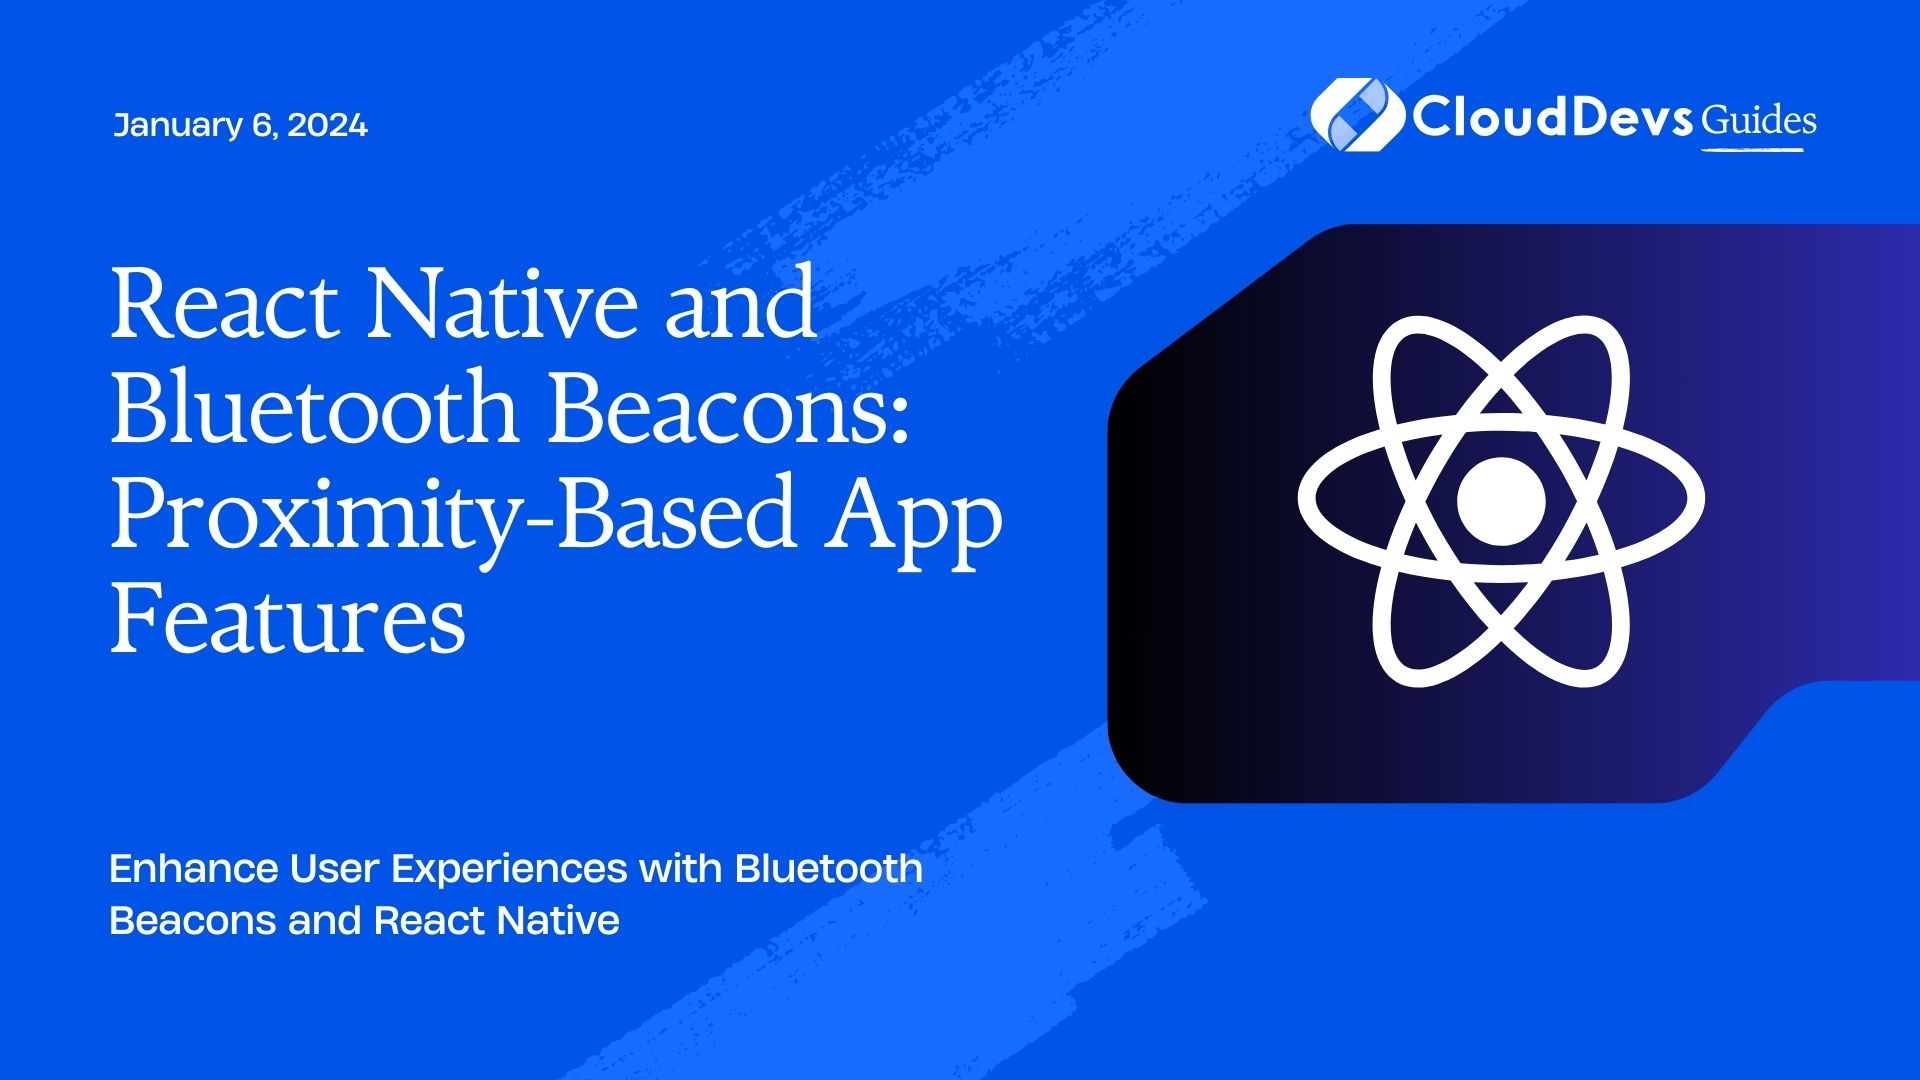 React Native and Bluetooth Beacons: Proximity-Based App Features